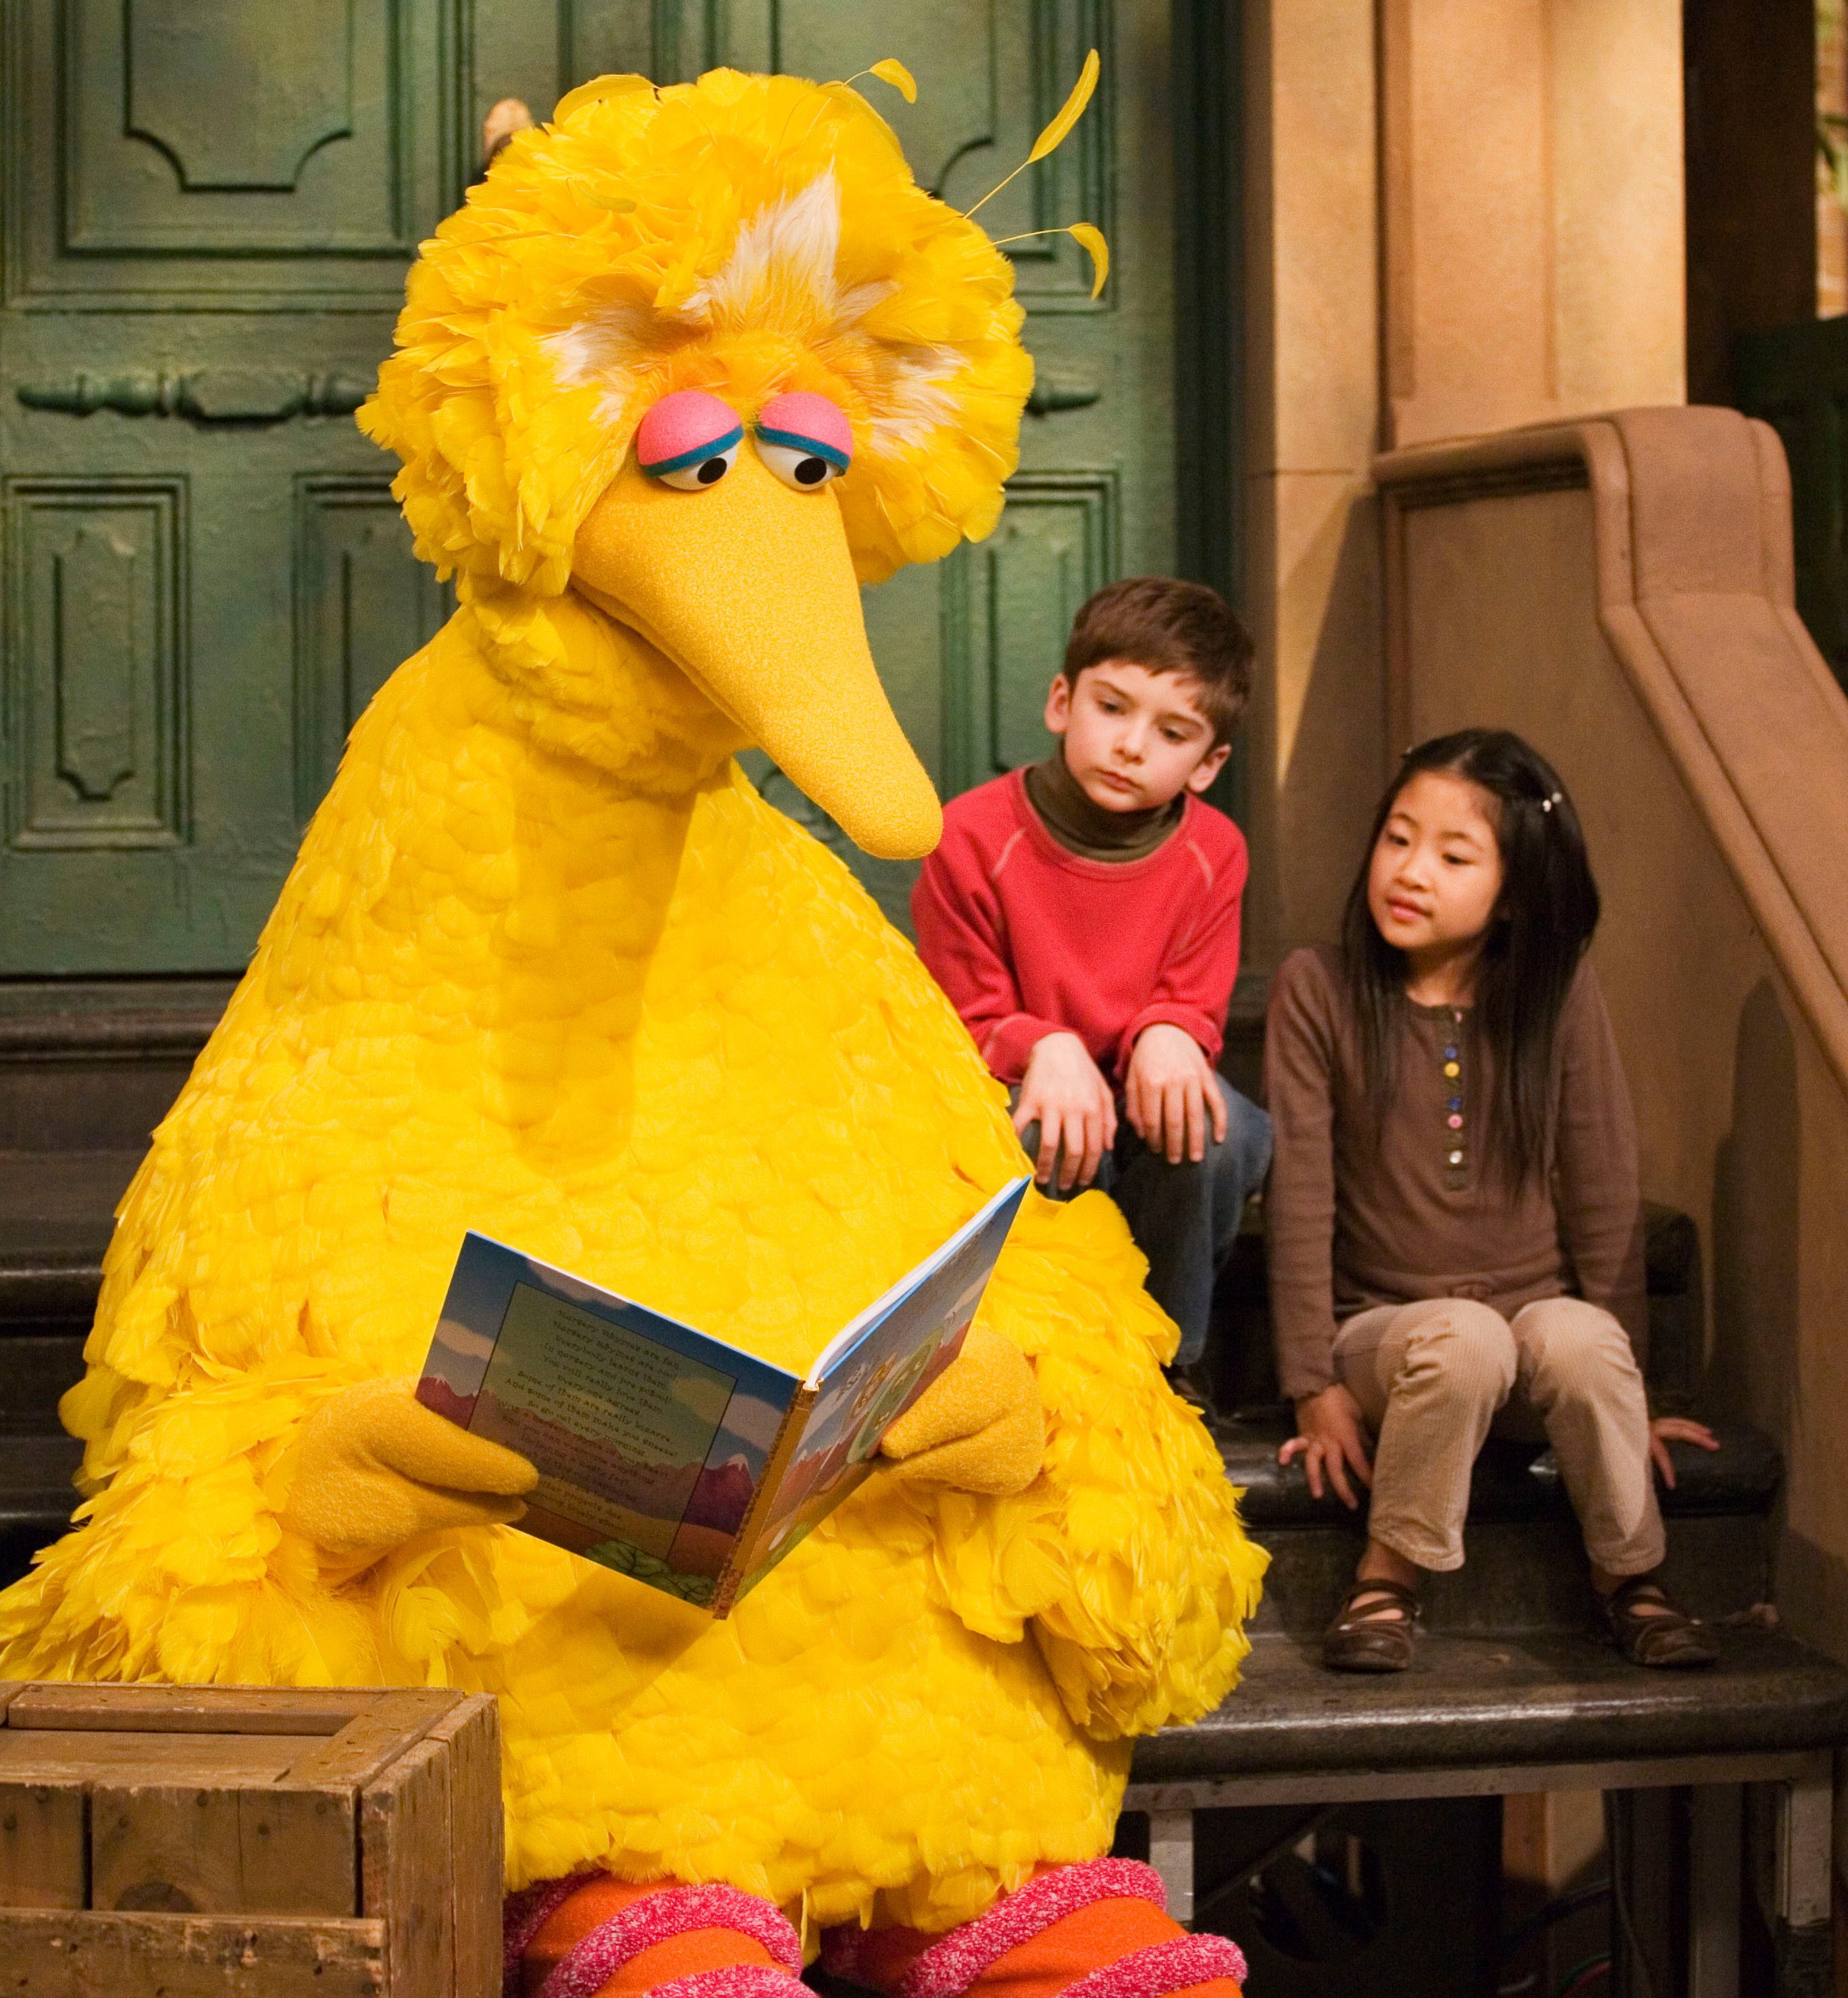 Mandatory Credit: Photo by Mark Lennihan/AP/Shutterstock (6363967a) Caroll Spinney, Big Bird Muppet character Big Bird reads to Connor Scott and Tiffany Jiao during a taping of the children's program "Sesame Street" in New York. Sesame Street continues to attract millions of viewers after 45 years on the air, appealing to both preschoolers and their parents with content that is educational and entertaining. The show has kept up with the times by making its segments faster-paced, by fine-tuning messages, and by keeping a steady flow of appearances by contemporary celebrity guests. The show first aired Nov. 10, 1969 Sesame Street 45 Years, New York, USA